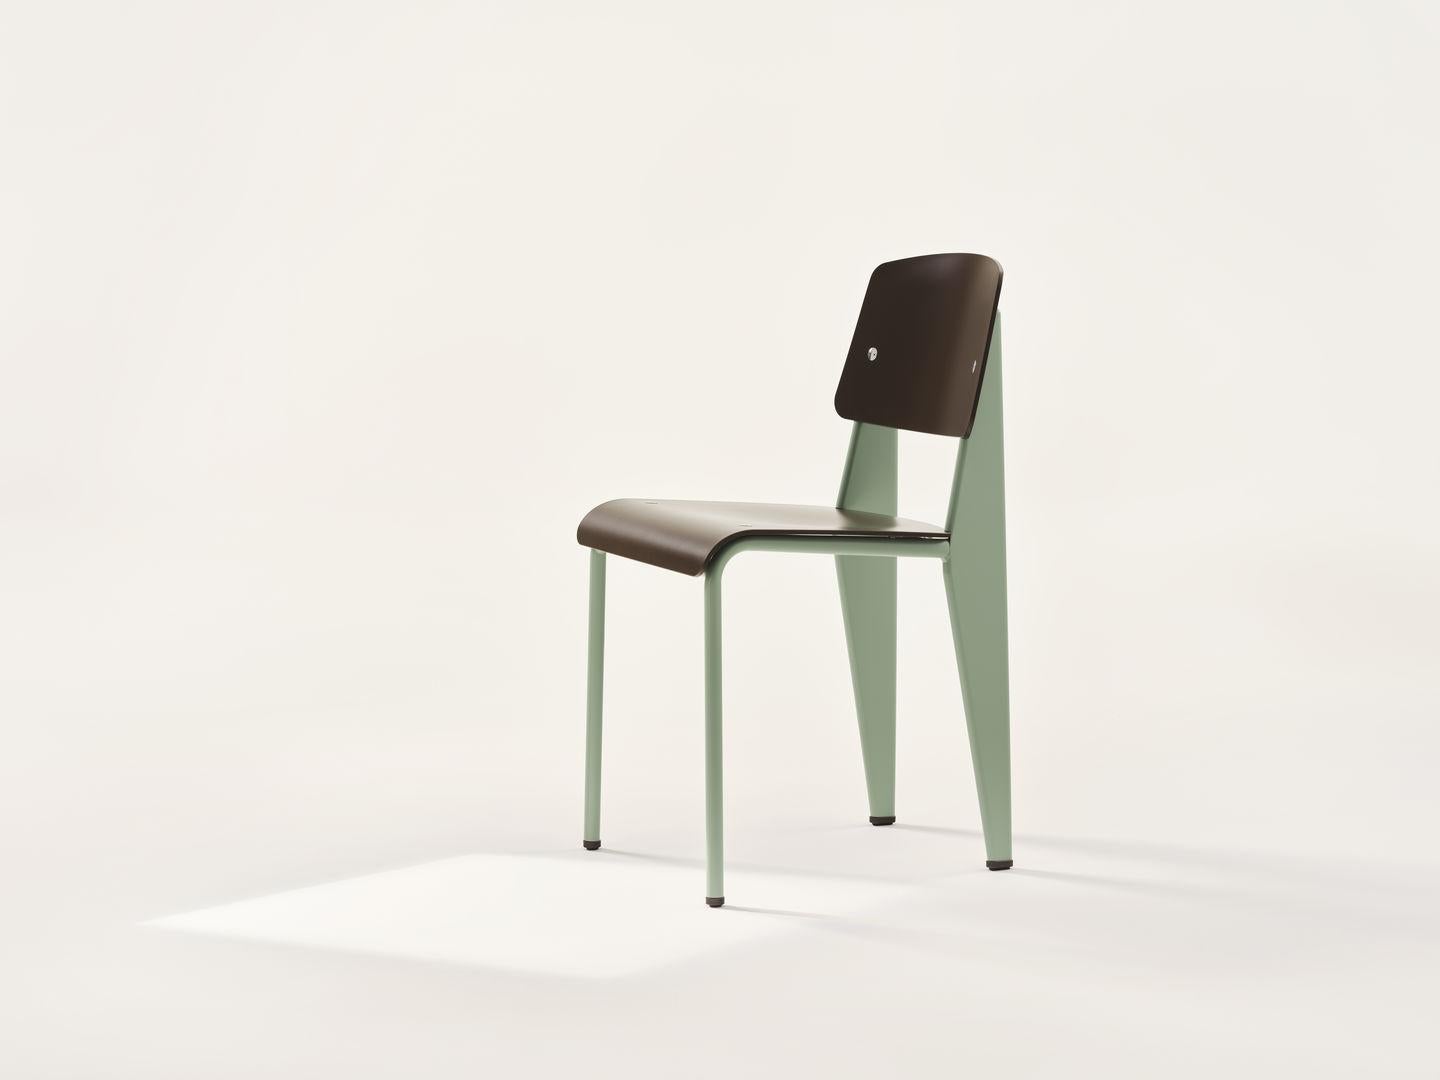 Chair designed by Jean Prouvé in 1934/50.
Manufactured by Vitra, Switzerland.

The standard chair by Jean Prouvé has evolved into one of the most famous classics of the French 'constructeur'. The seat and backrest of this understated, iconic